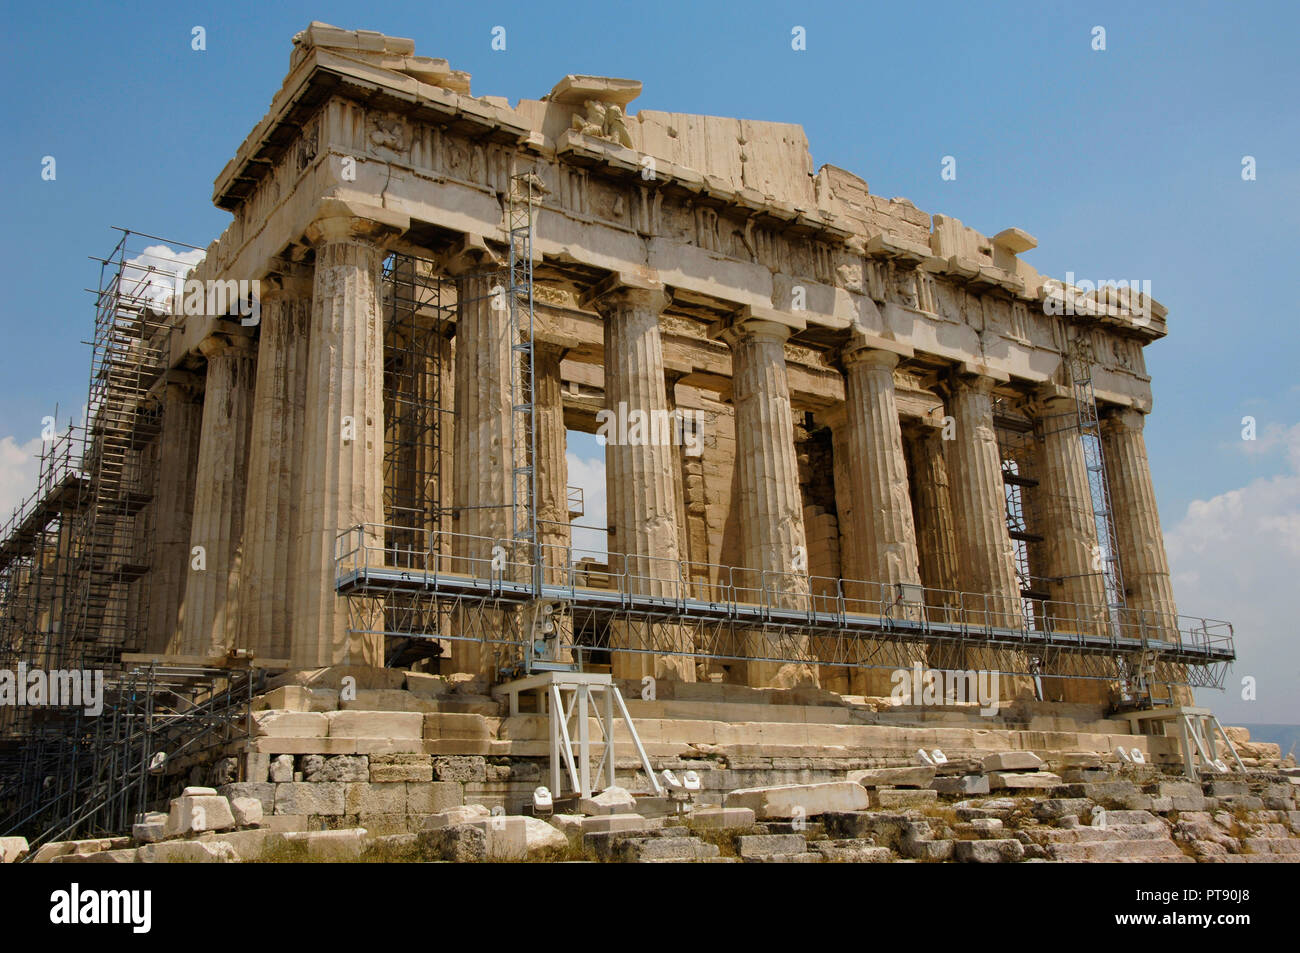 Greece. Athens. Acropolis. Parthenon. Classical temple dedicated to Athena, 447 BC-432 BC. Doric order. Architects: Iktinos and Callicrates. Sculptor: Phidias. General  view. Stock Photo